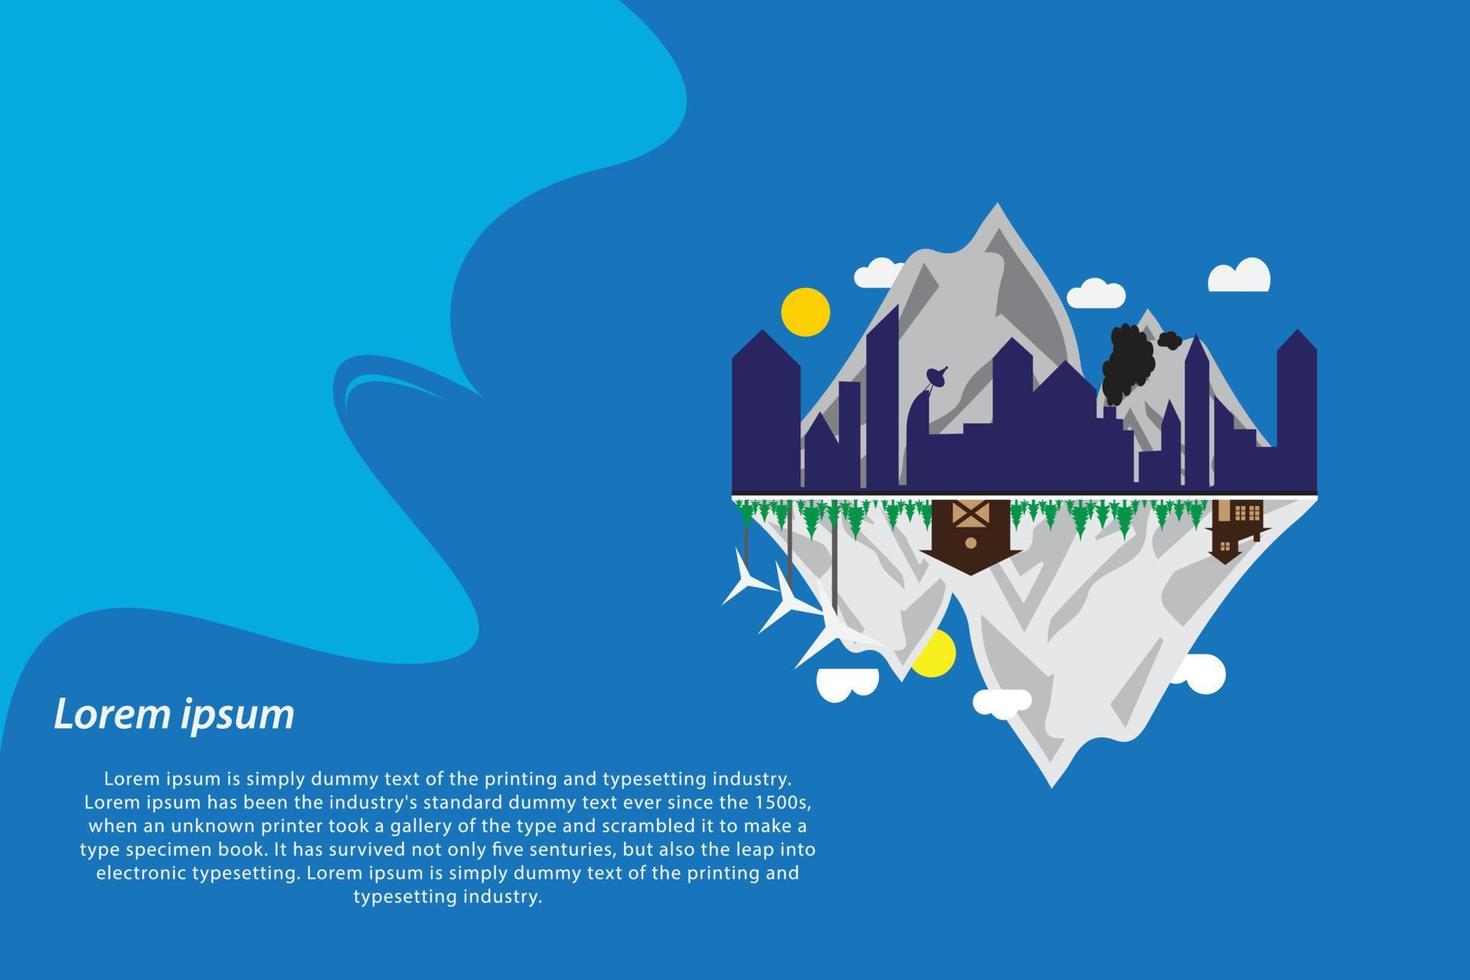 Creative save ecological info graphic layout design with showing pollution and development elements vector